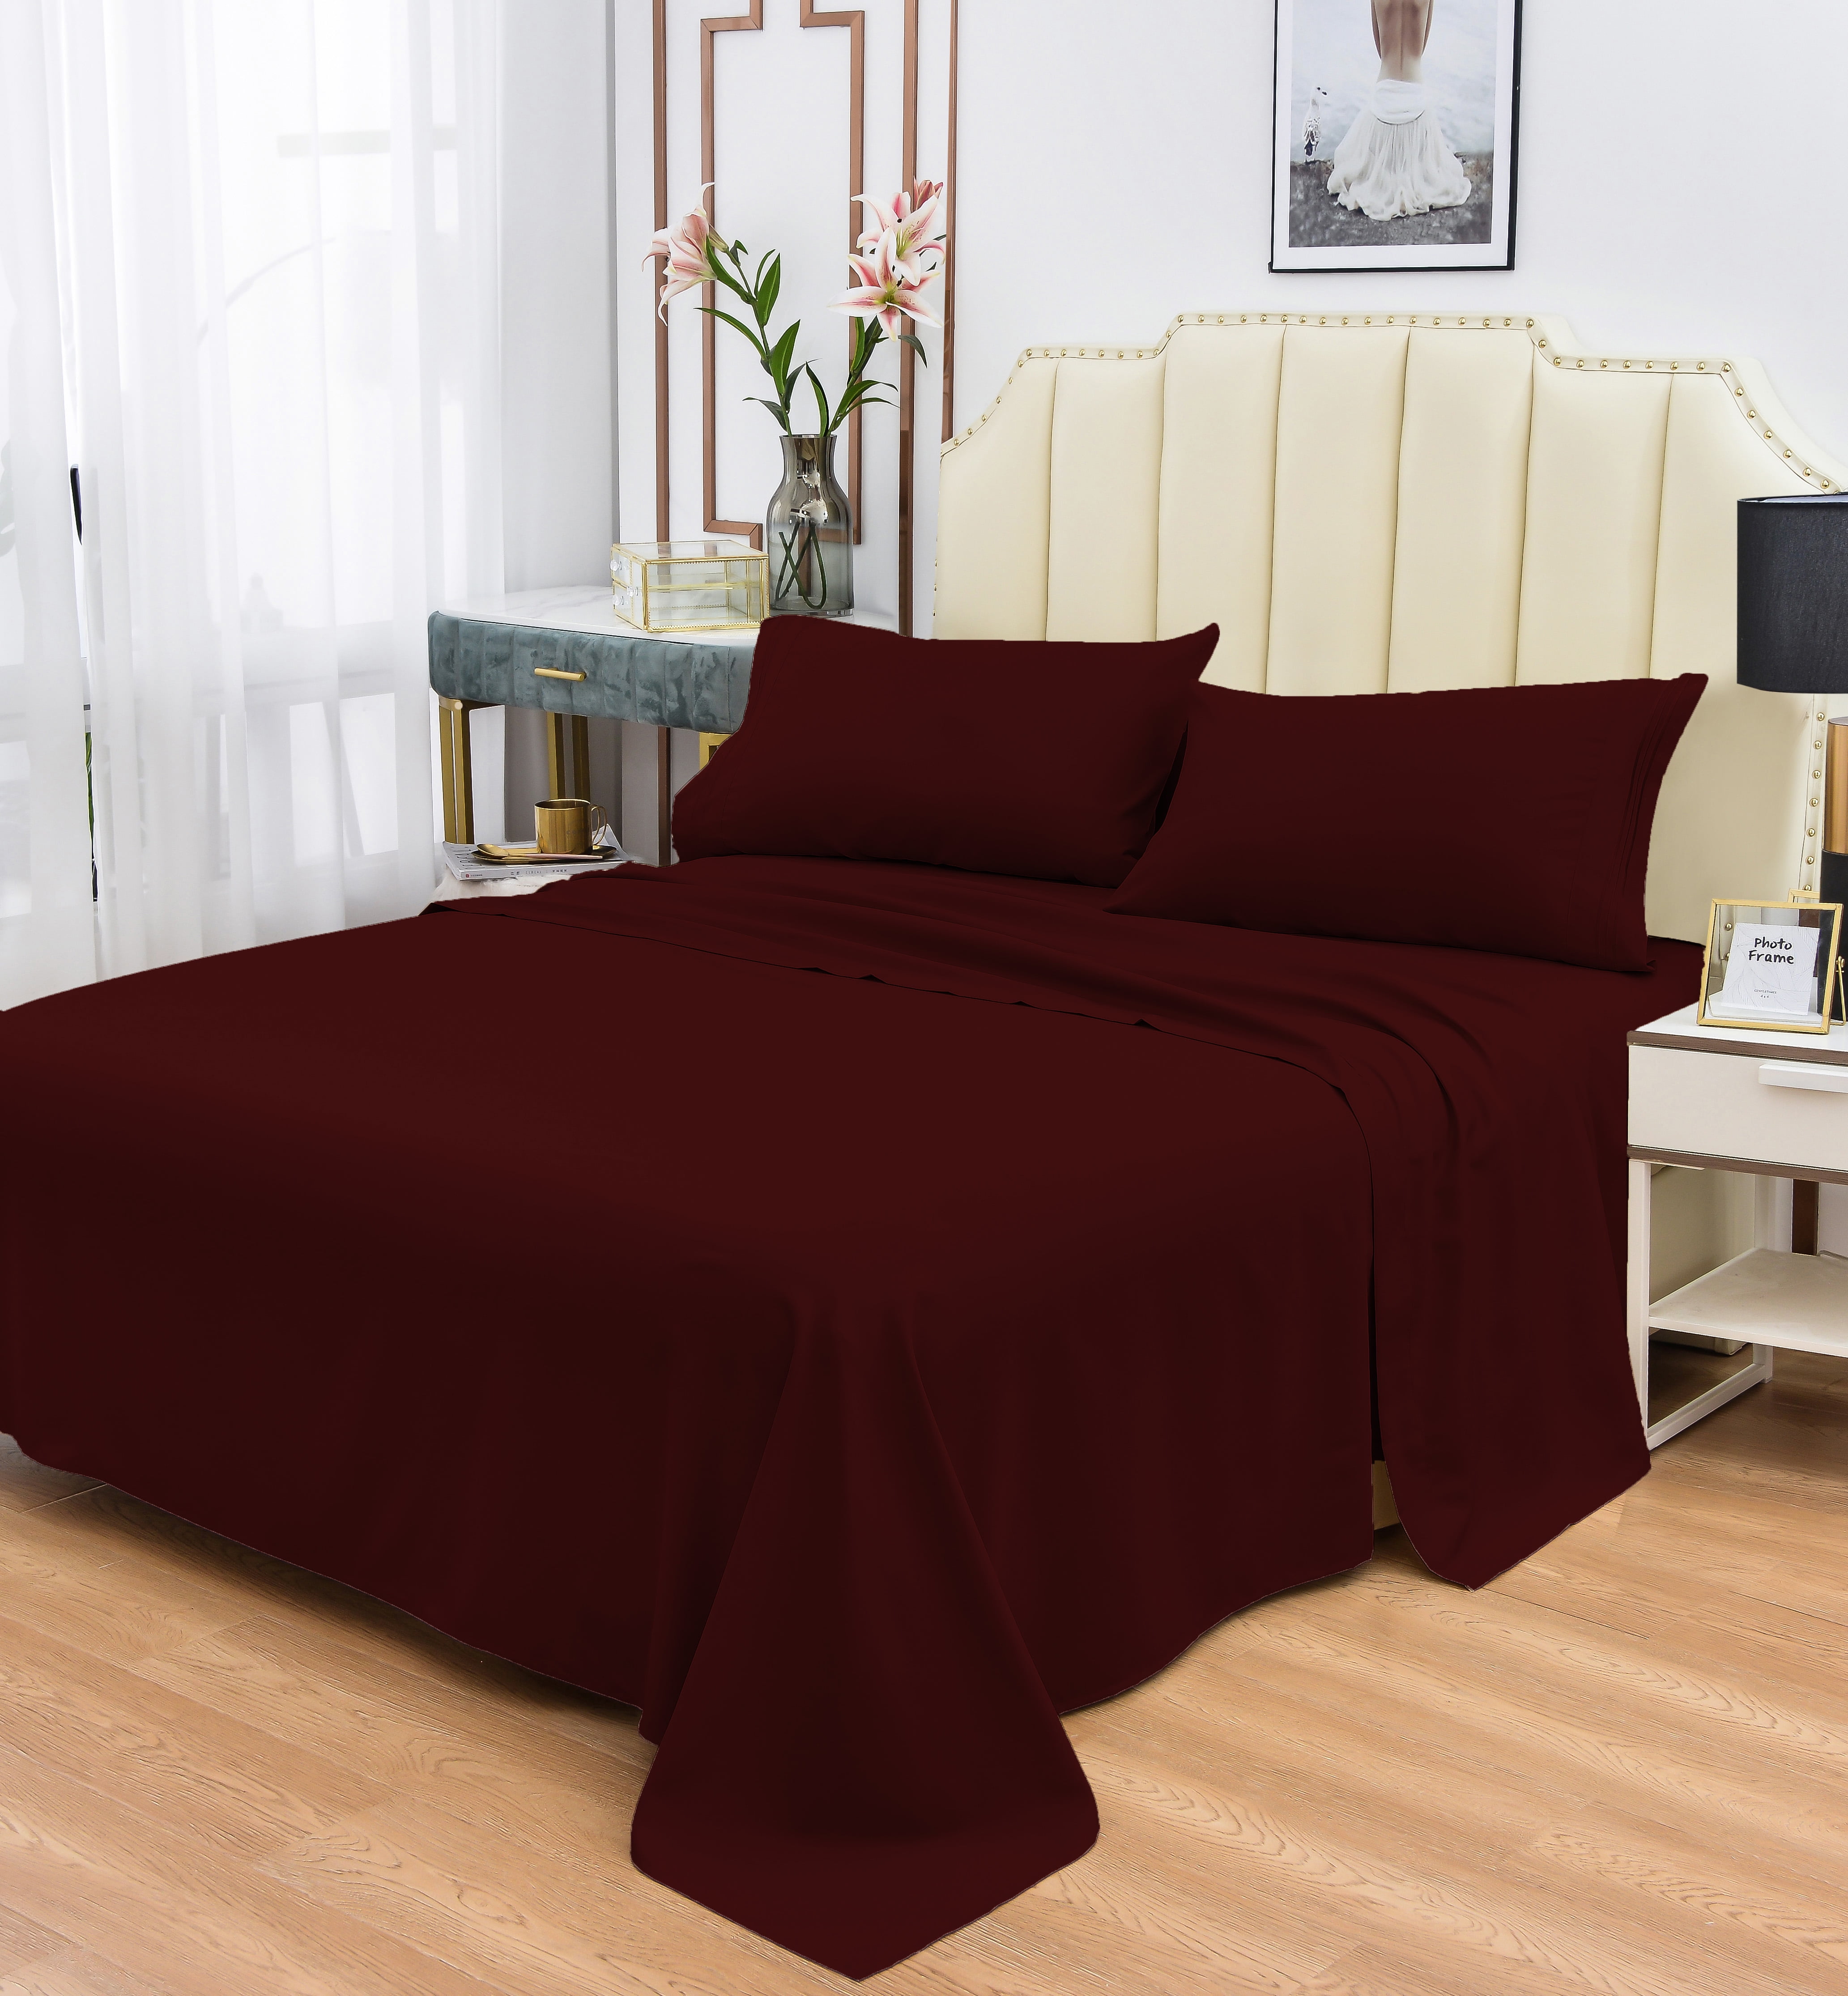 Okao Wholesale Rayon Made from Bamboo Sheet Set, California King Burgundy Sheets-Wrinkle Free-Softer than Cotton- Deep Pockets - 4 Piece-1 Fitted Sheet, 1 Flat, 2 Pillowcases California King, Burgundy